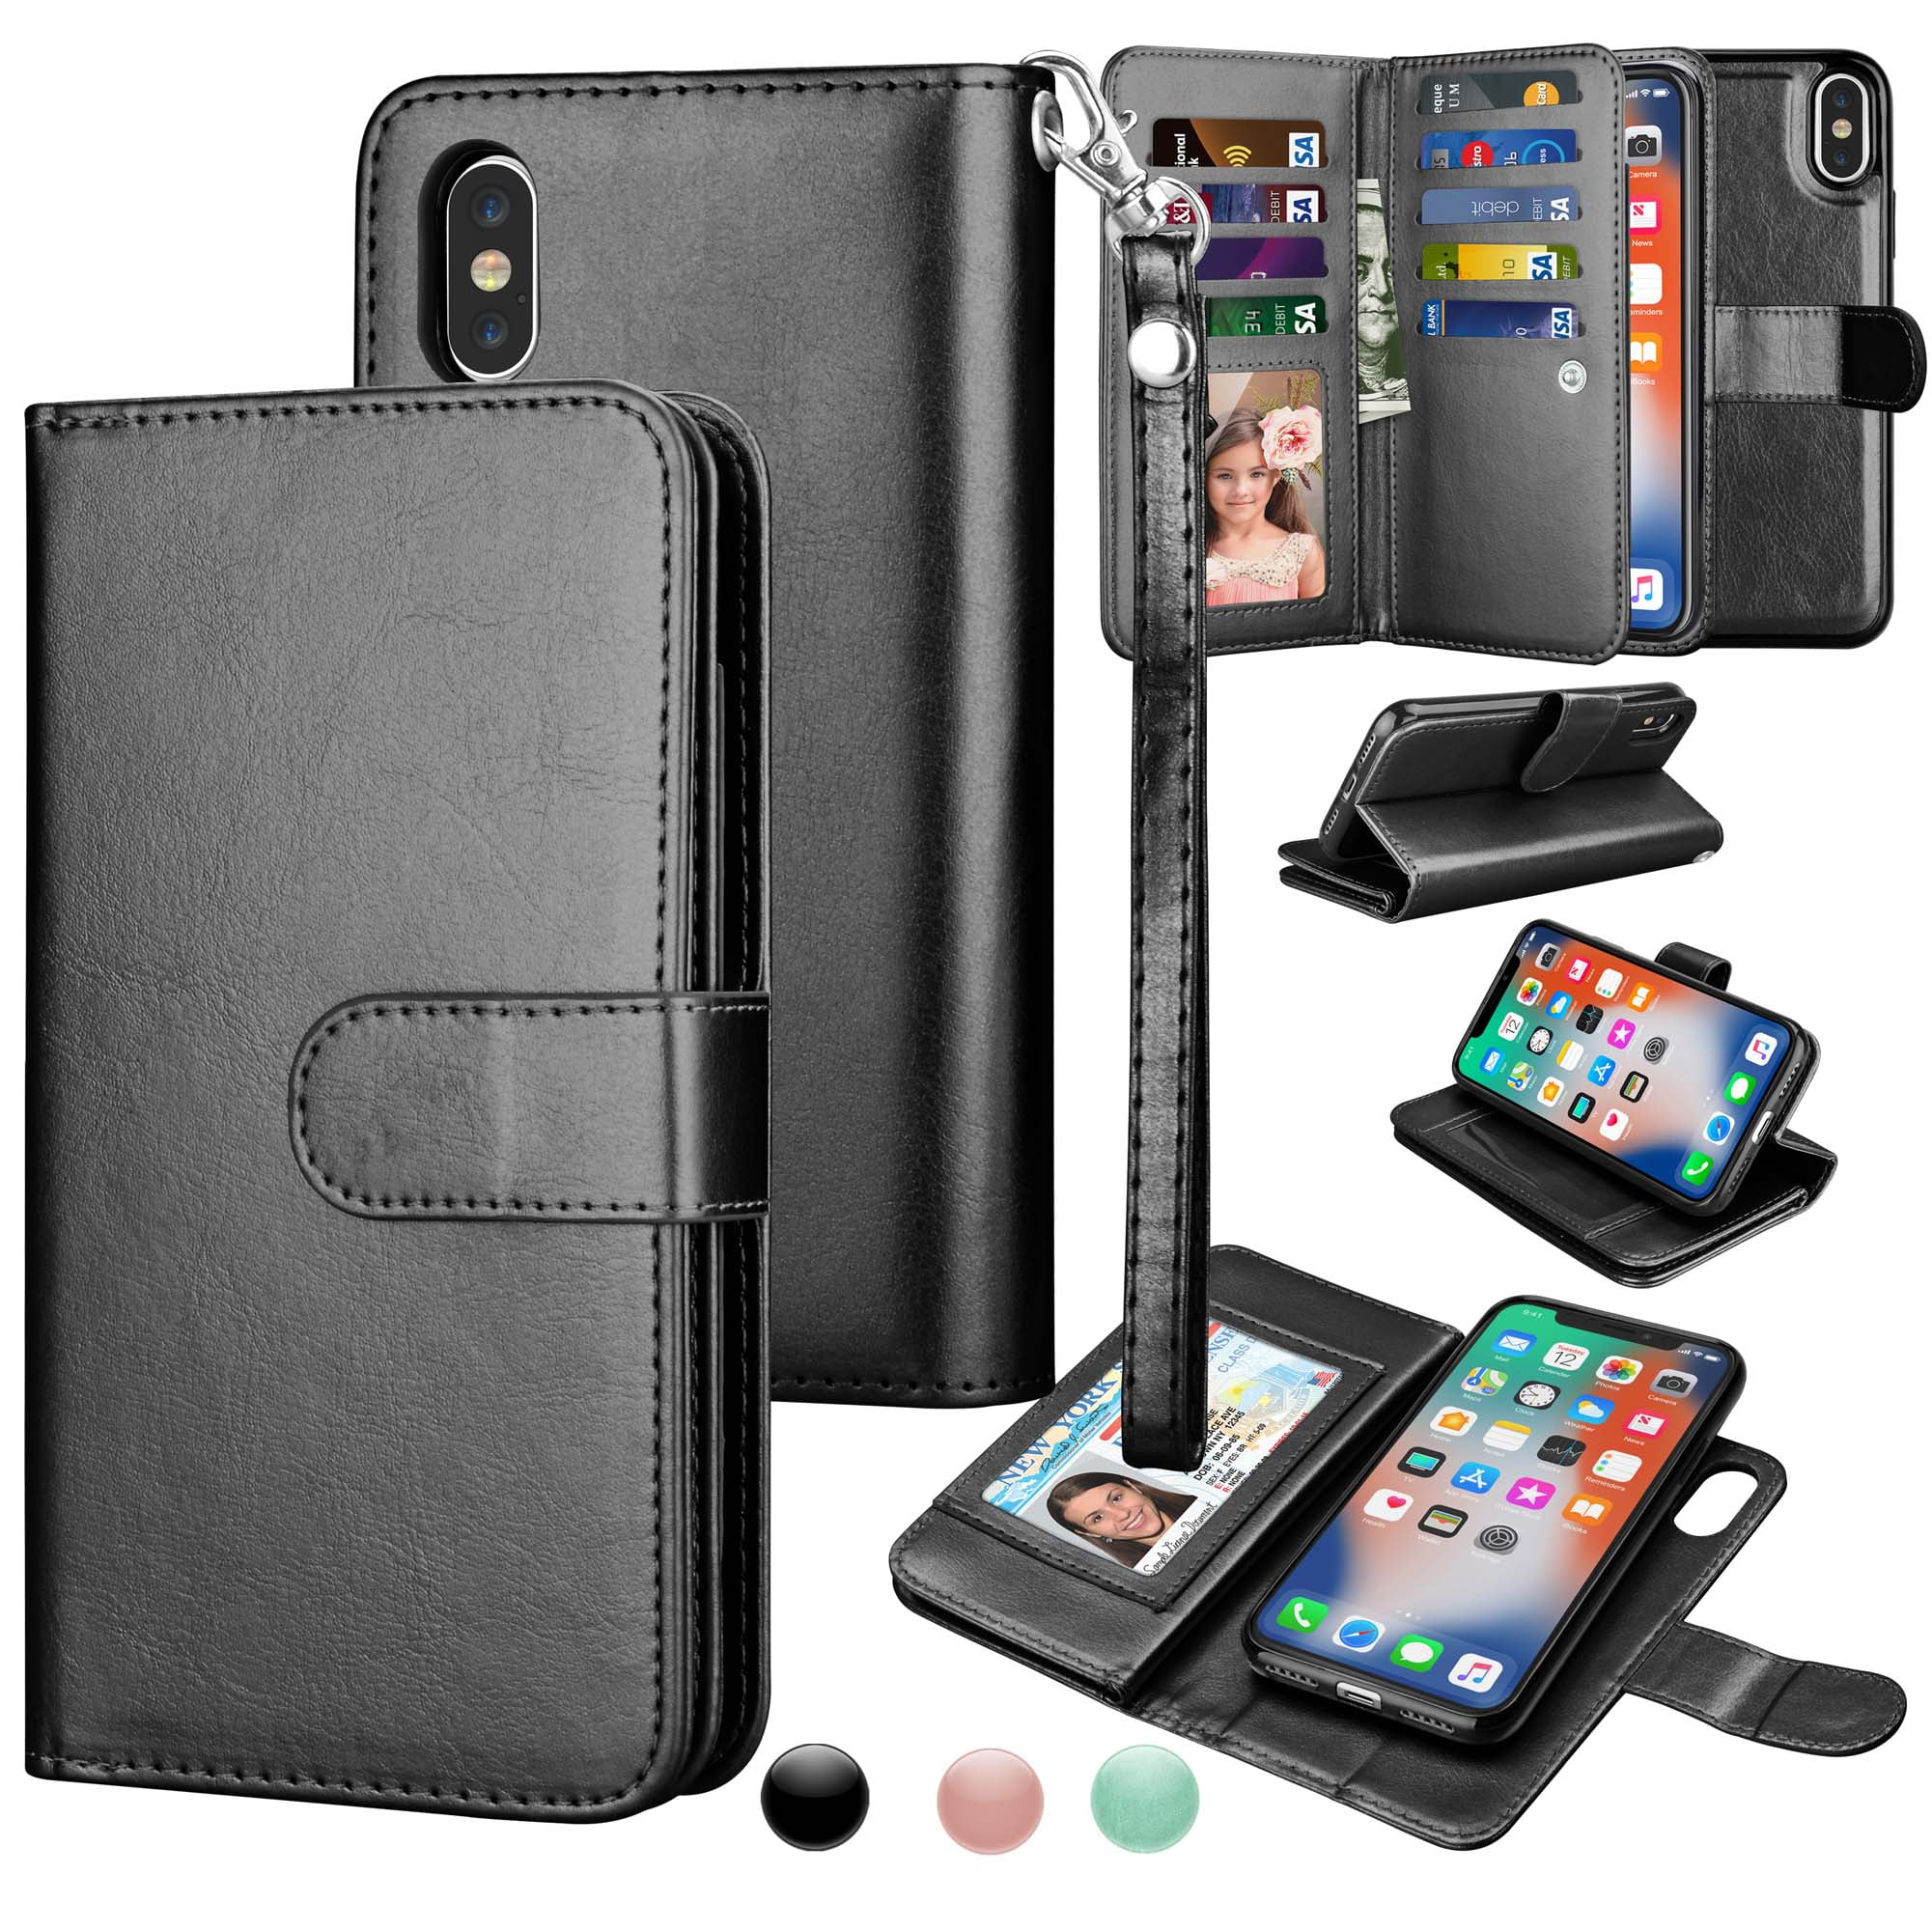 iPhone Xs Max Case, Wallet Case iPhone Xs Max, iPhone Xs Max Pu Leather Case, Njjex Pu Leather ...